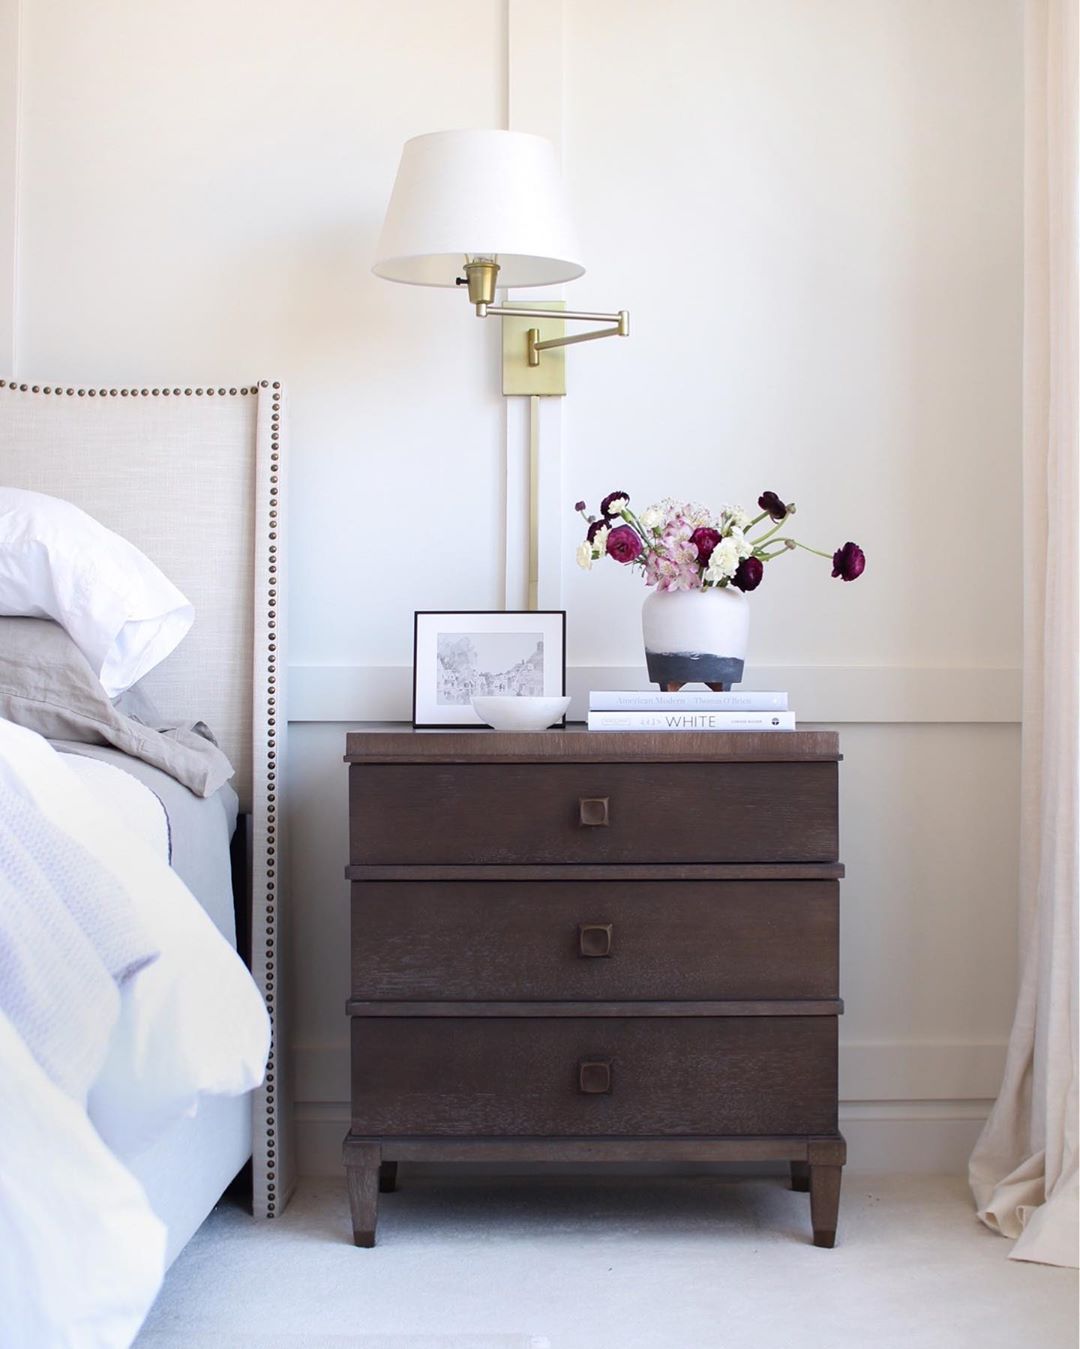 Wooden Nightstand Next to Made Bed. Photo by Instagram user @thesimplystyledhome